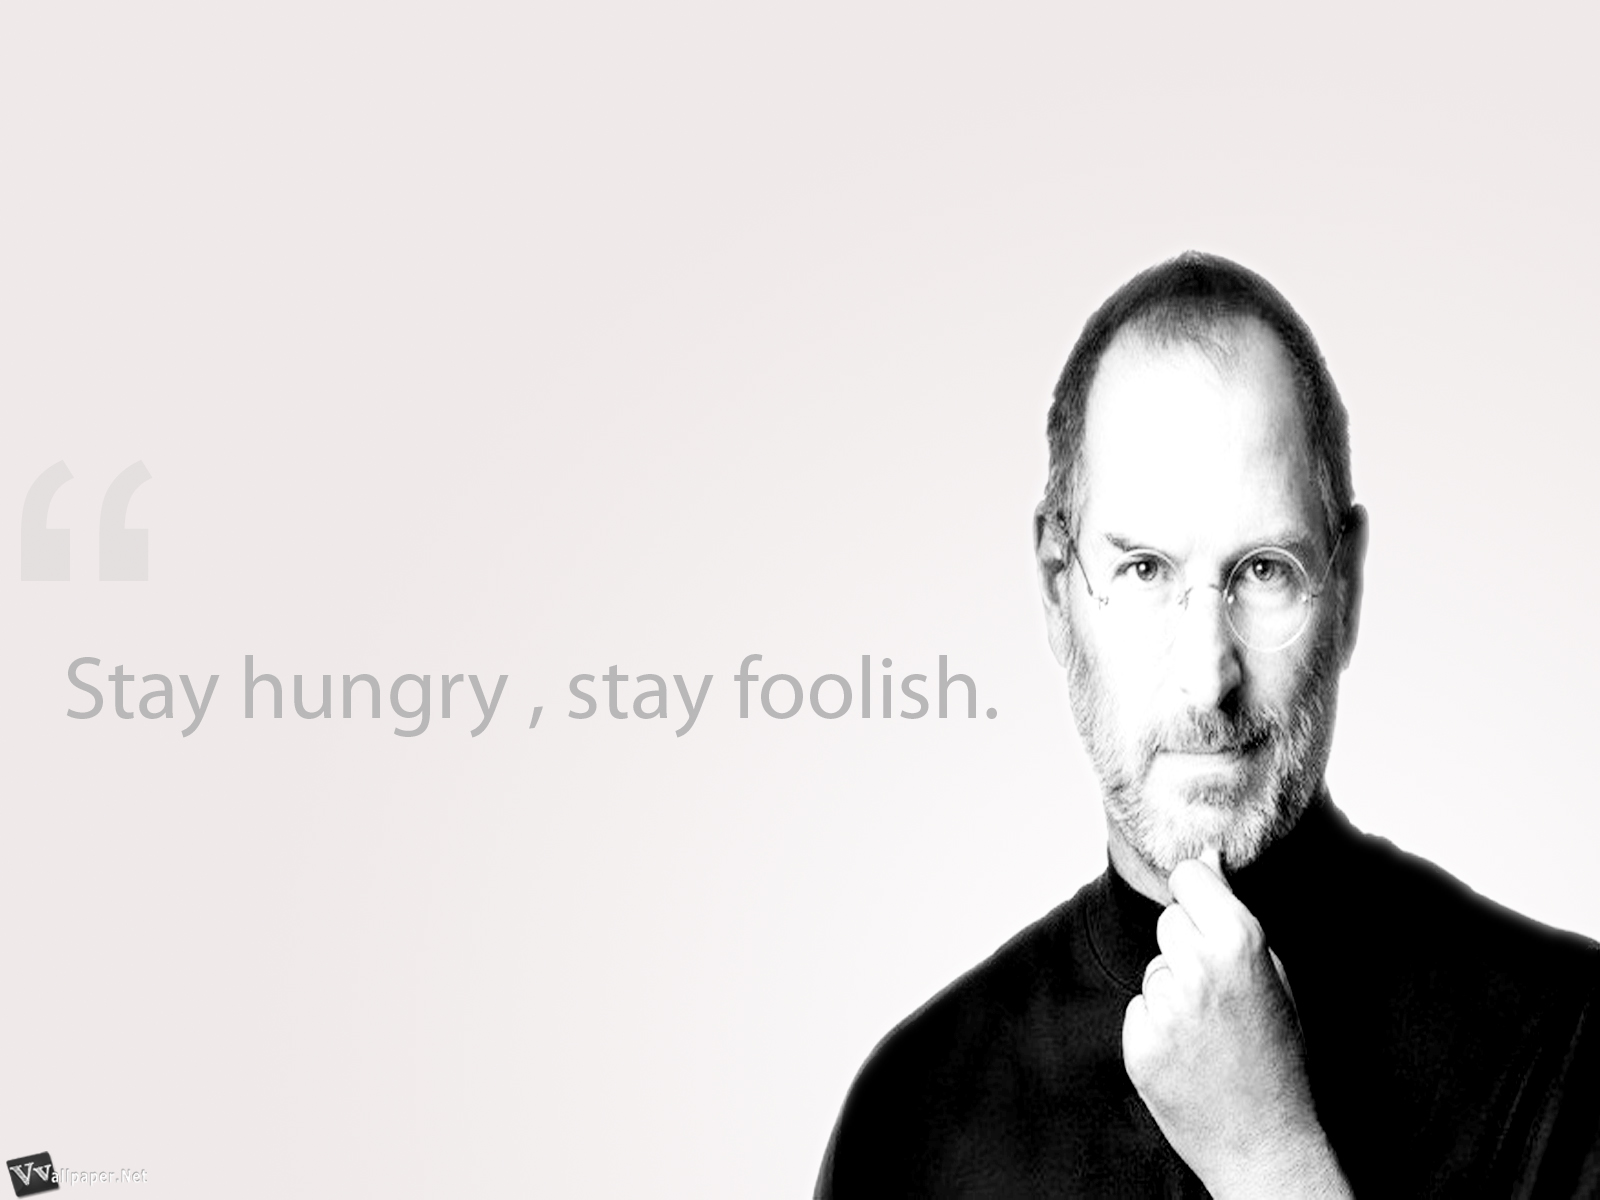 Steve Jobs HD Wallpaper And Quotes In For